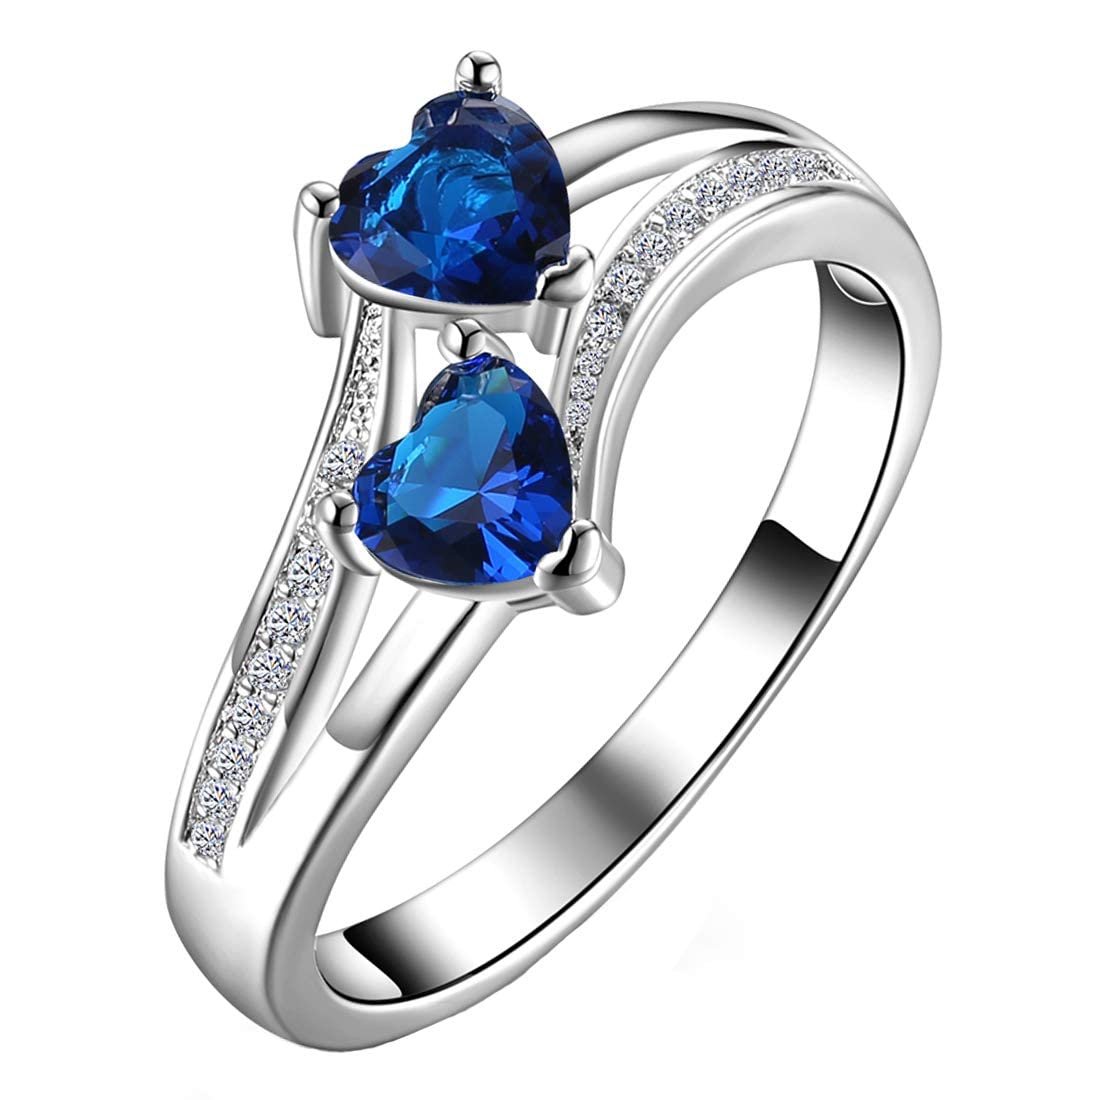 Rings for Women Valentines Special Dual Heart Ring Silver Plated Blue Crystal Ring for Women and Girls.